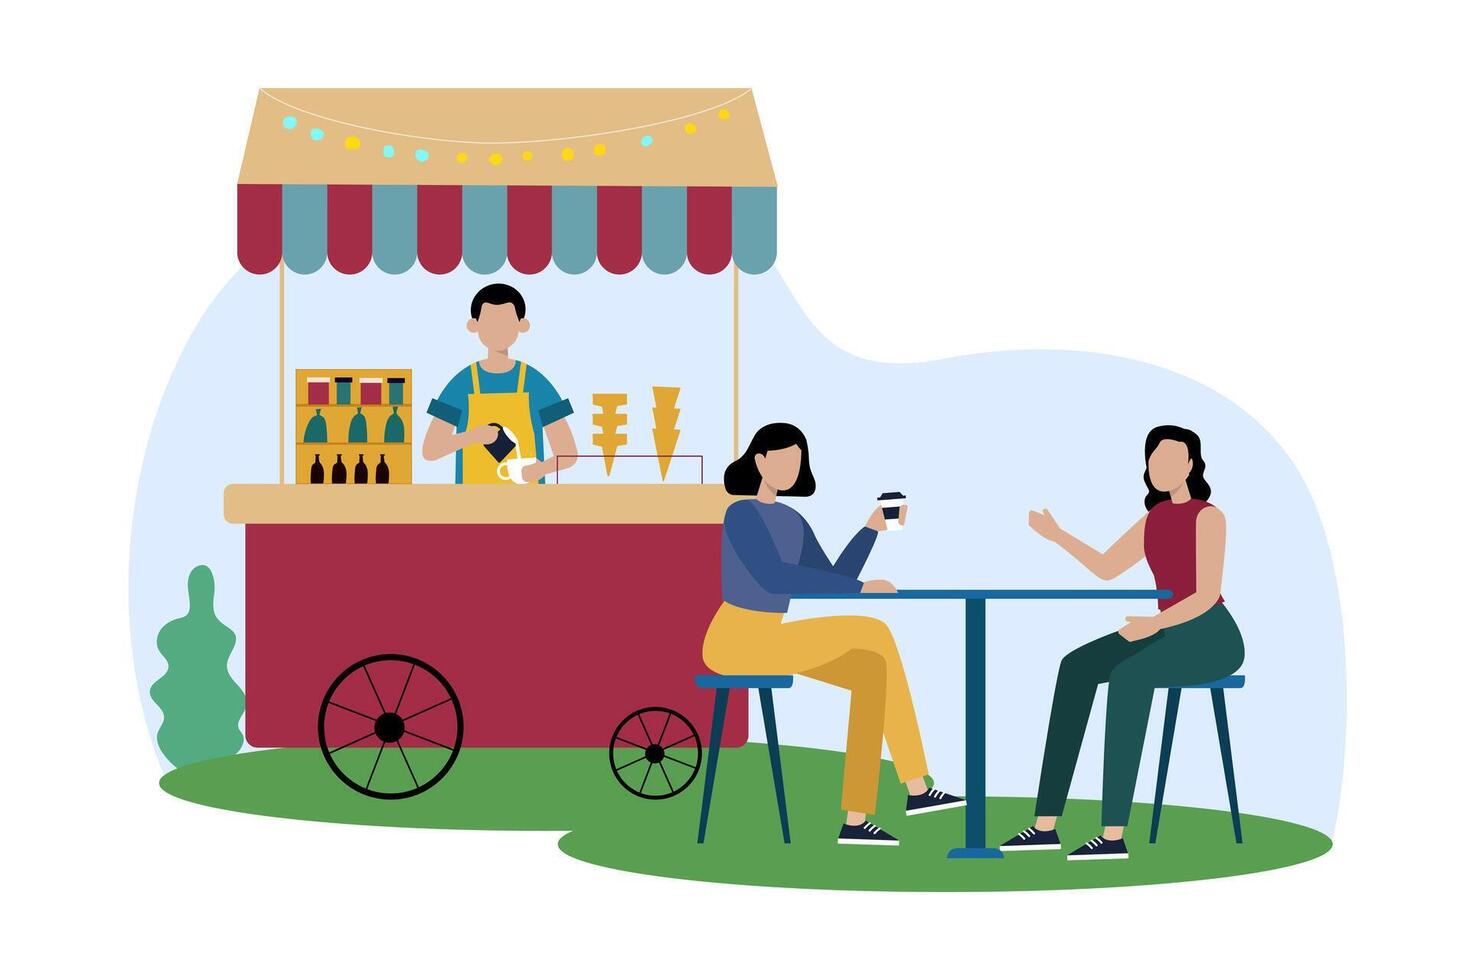 Man selling ice-cream, females drinking coffee. Selling food outdoors vector